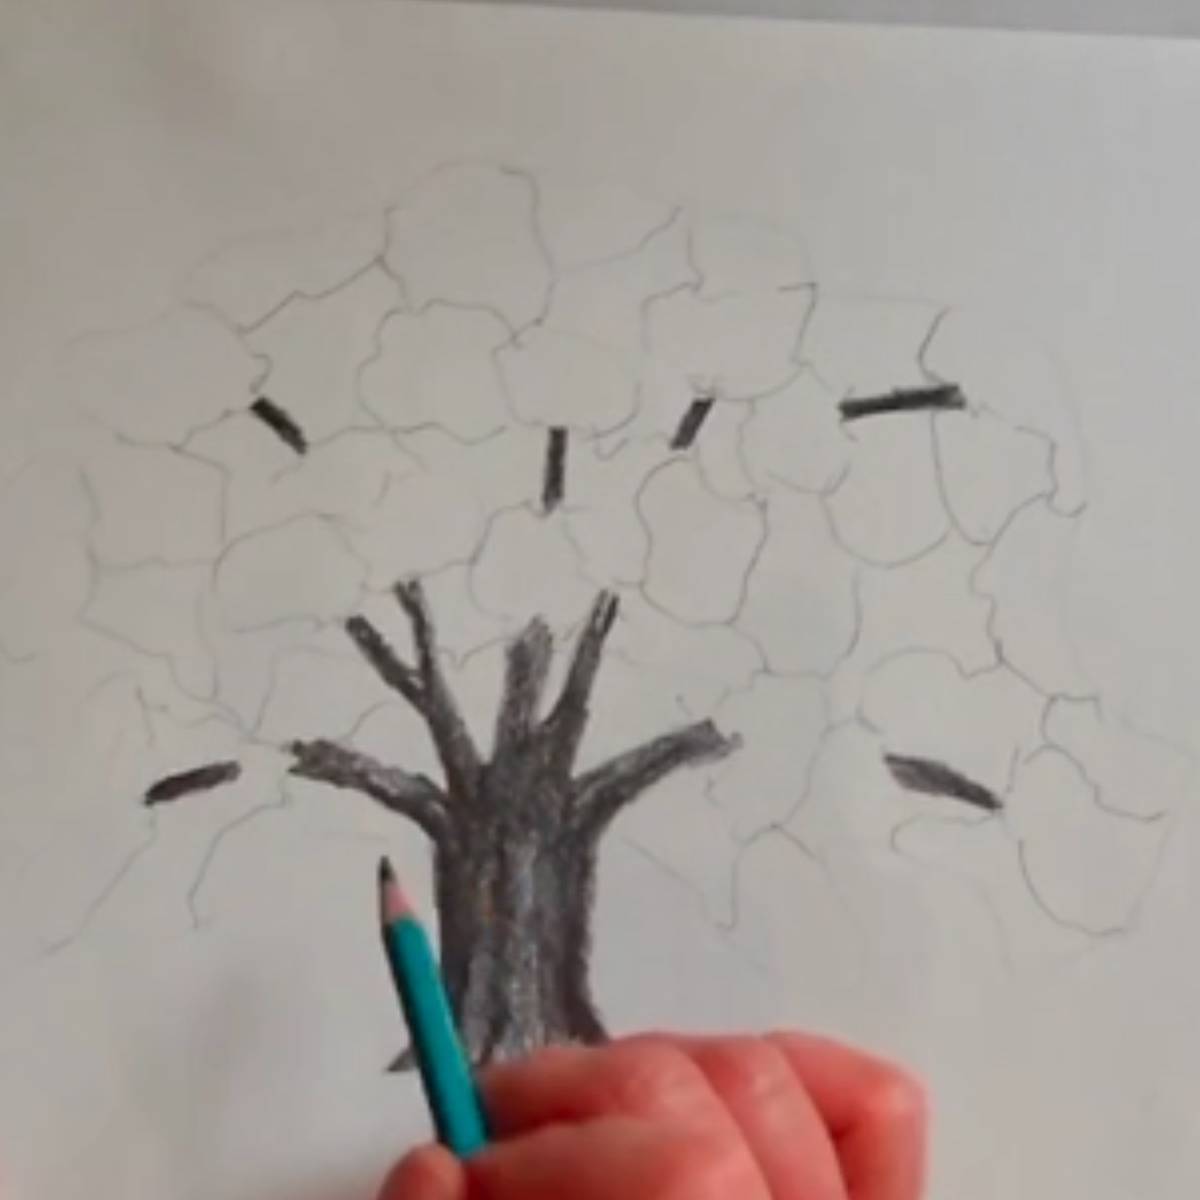 Sketch of shading the trunk, branches, and outside of the tree with the artist's hand and pencil.